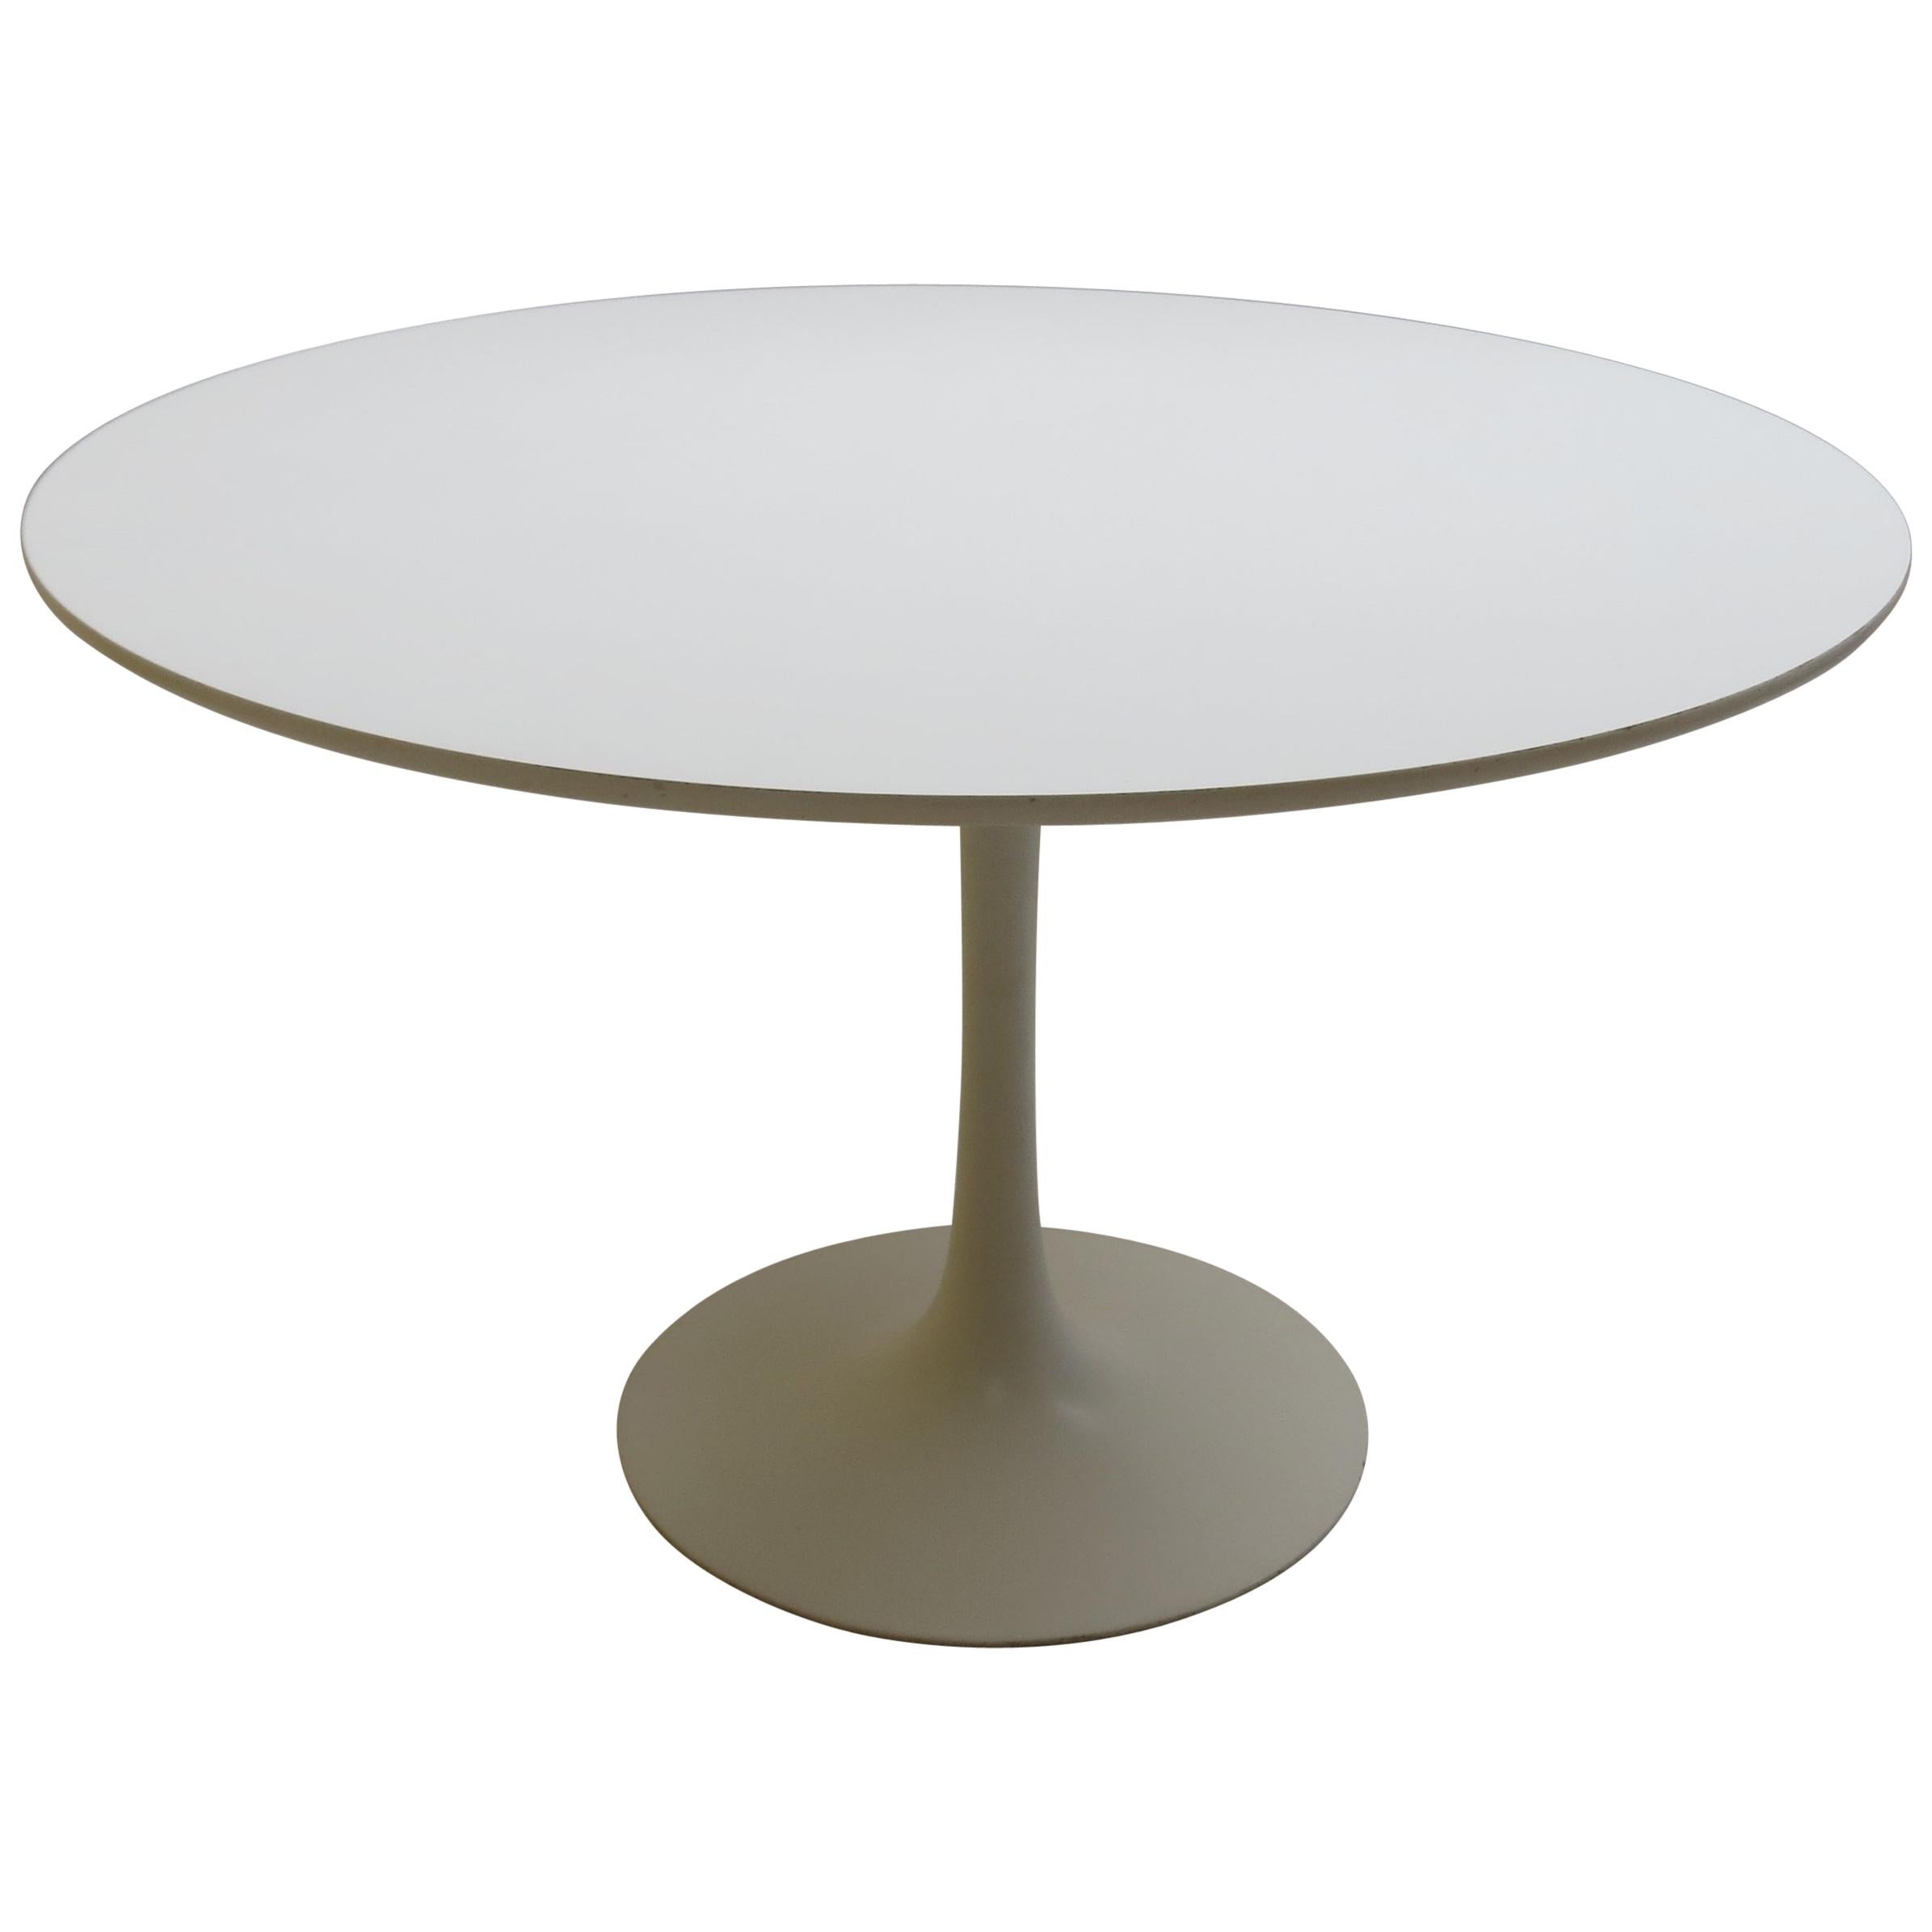 Large 1960s Arkana Tulip Dining Table by Maurice Burke